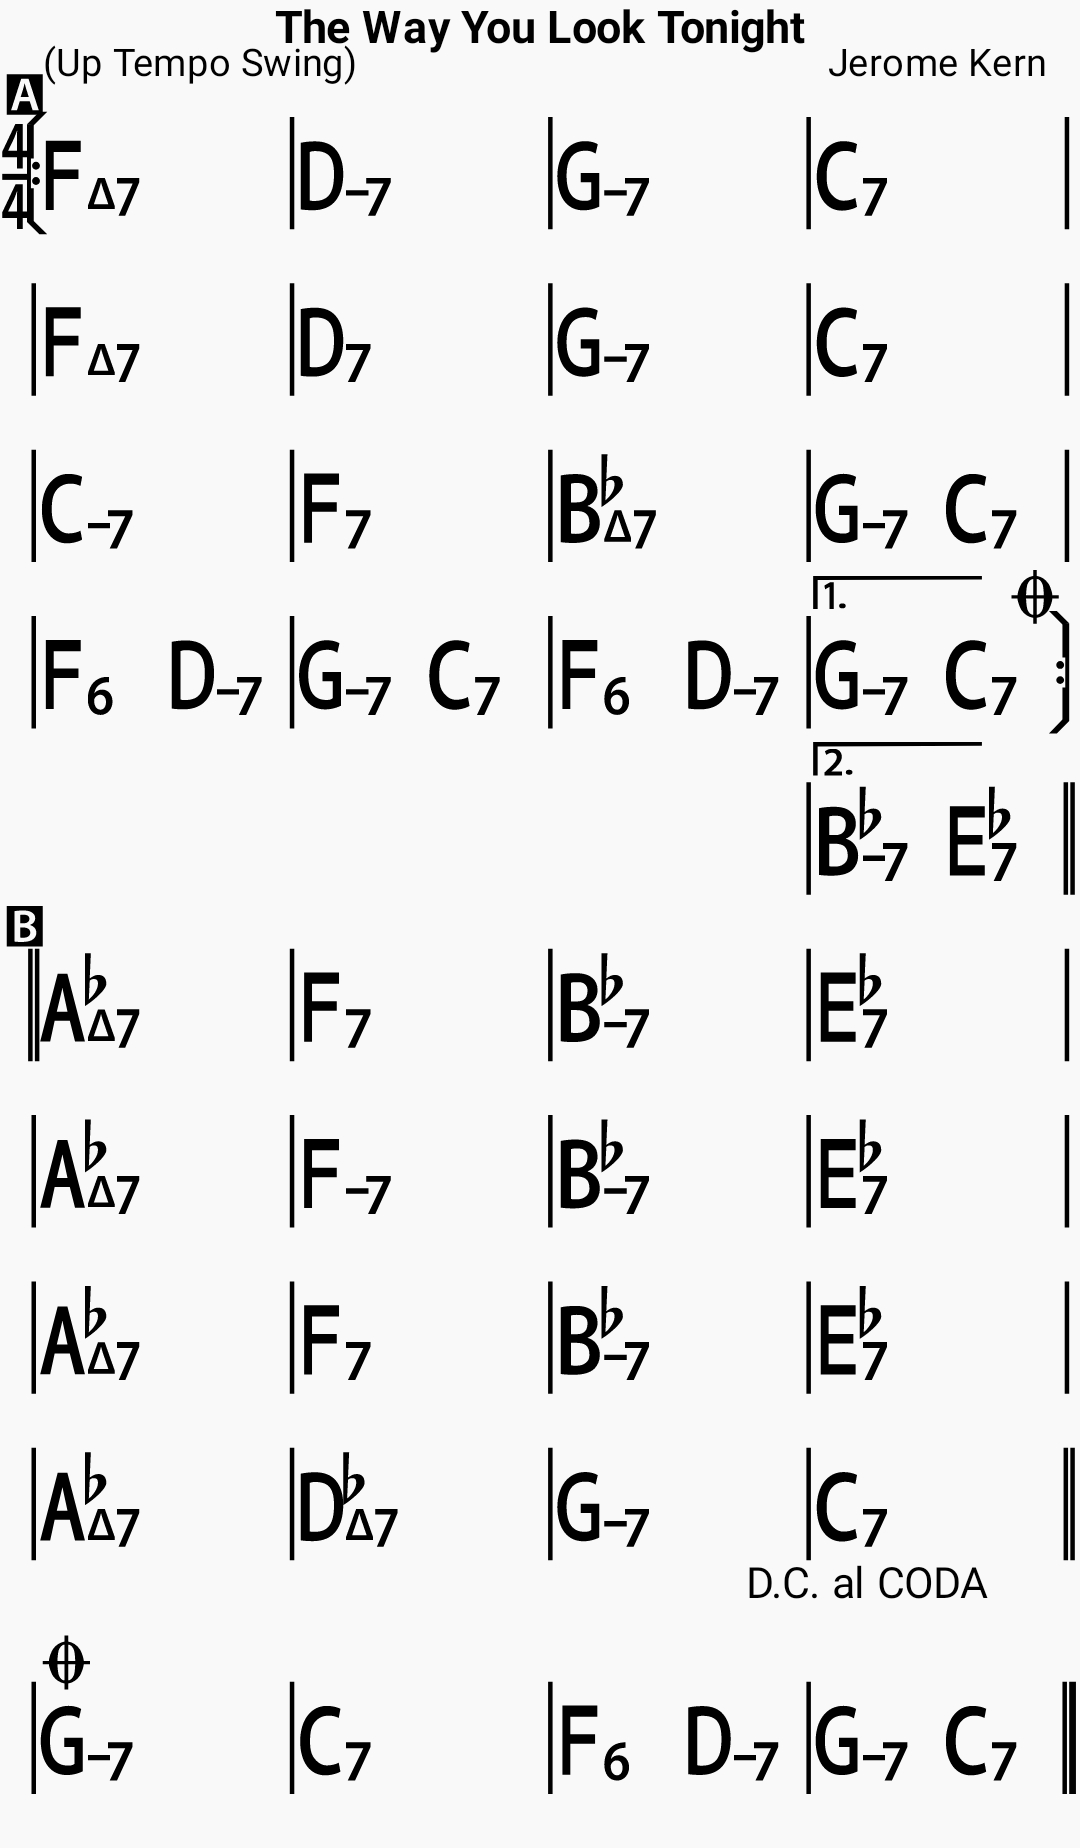 Chord chart for the jazz standard Way You Look Tonight, The